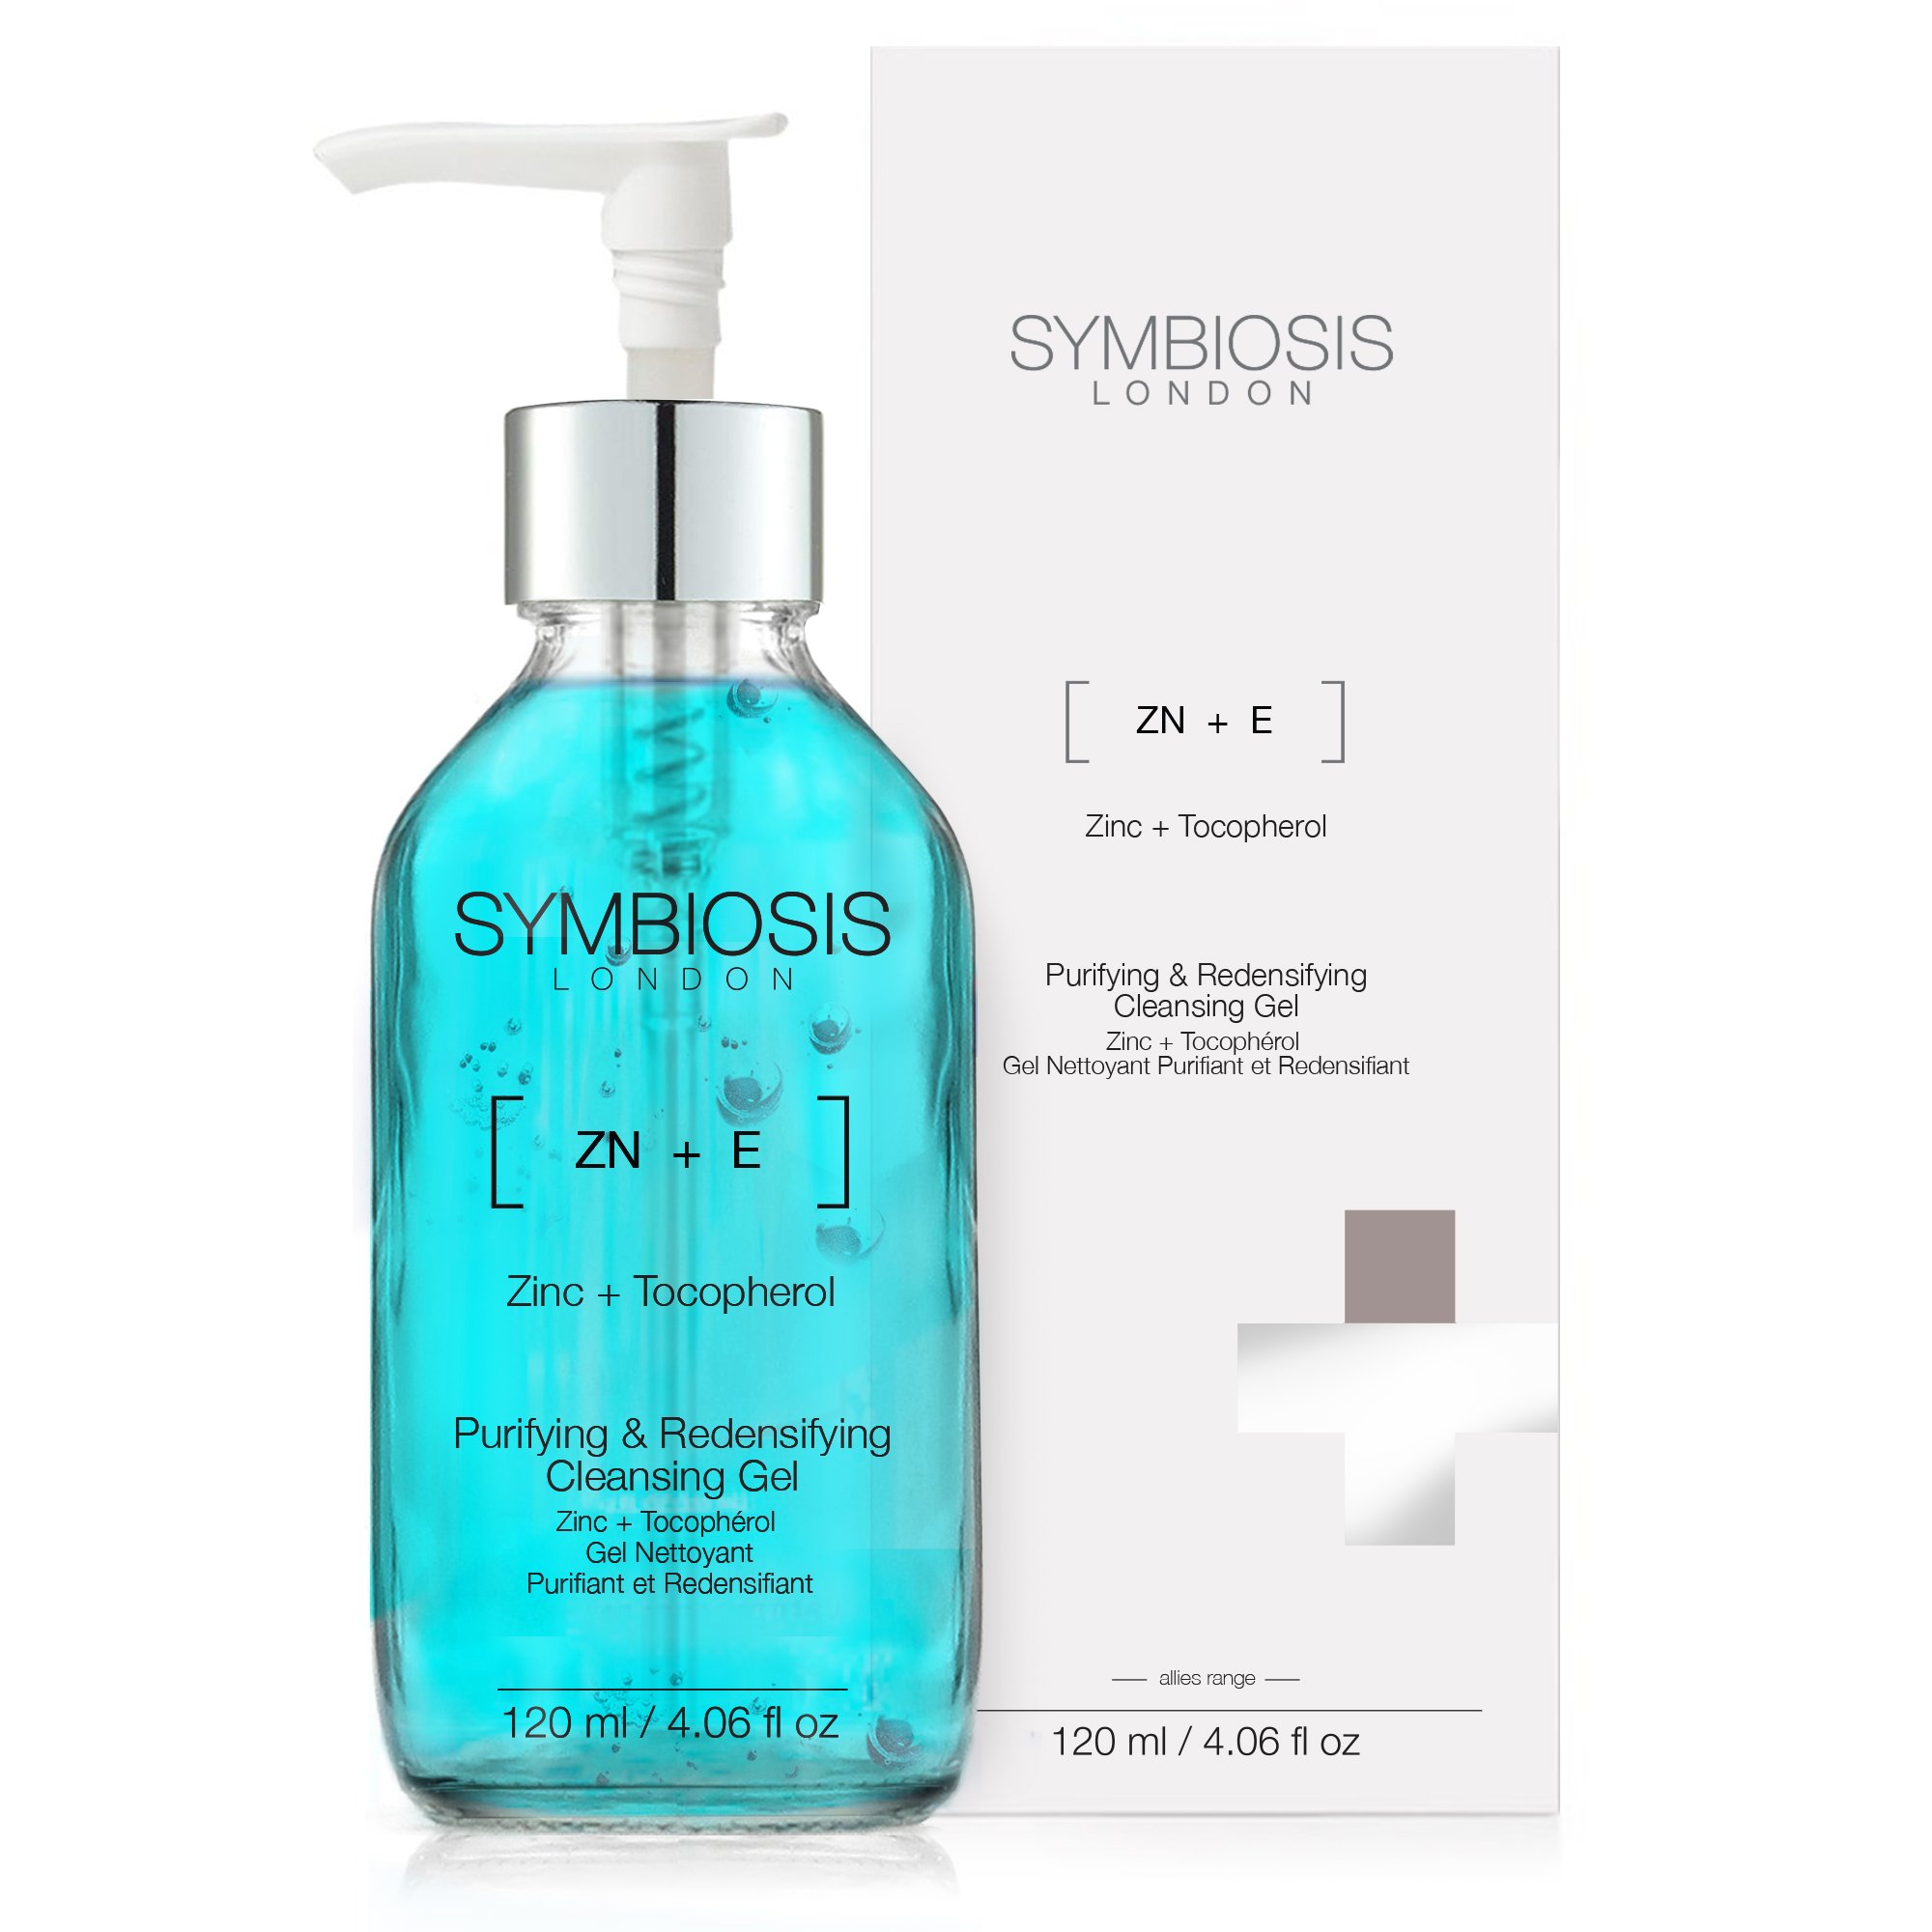 Purifying cleansing gel. Клинсинг гель. Symbiosis косметика. Cleansing Gel фото.